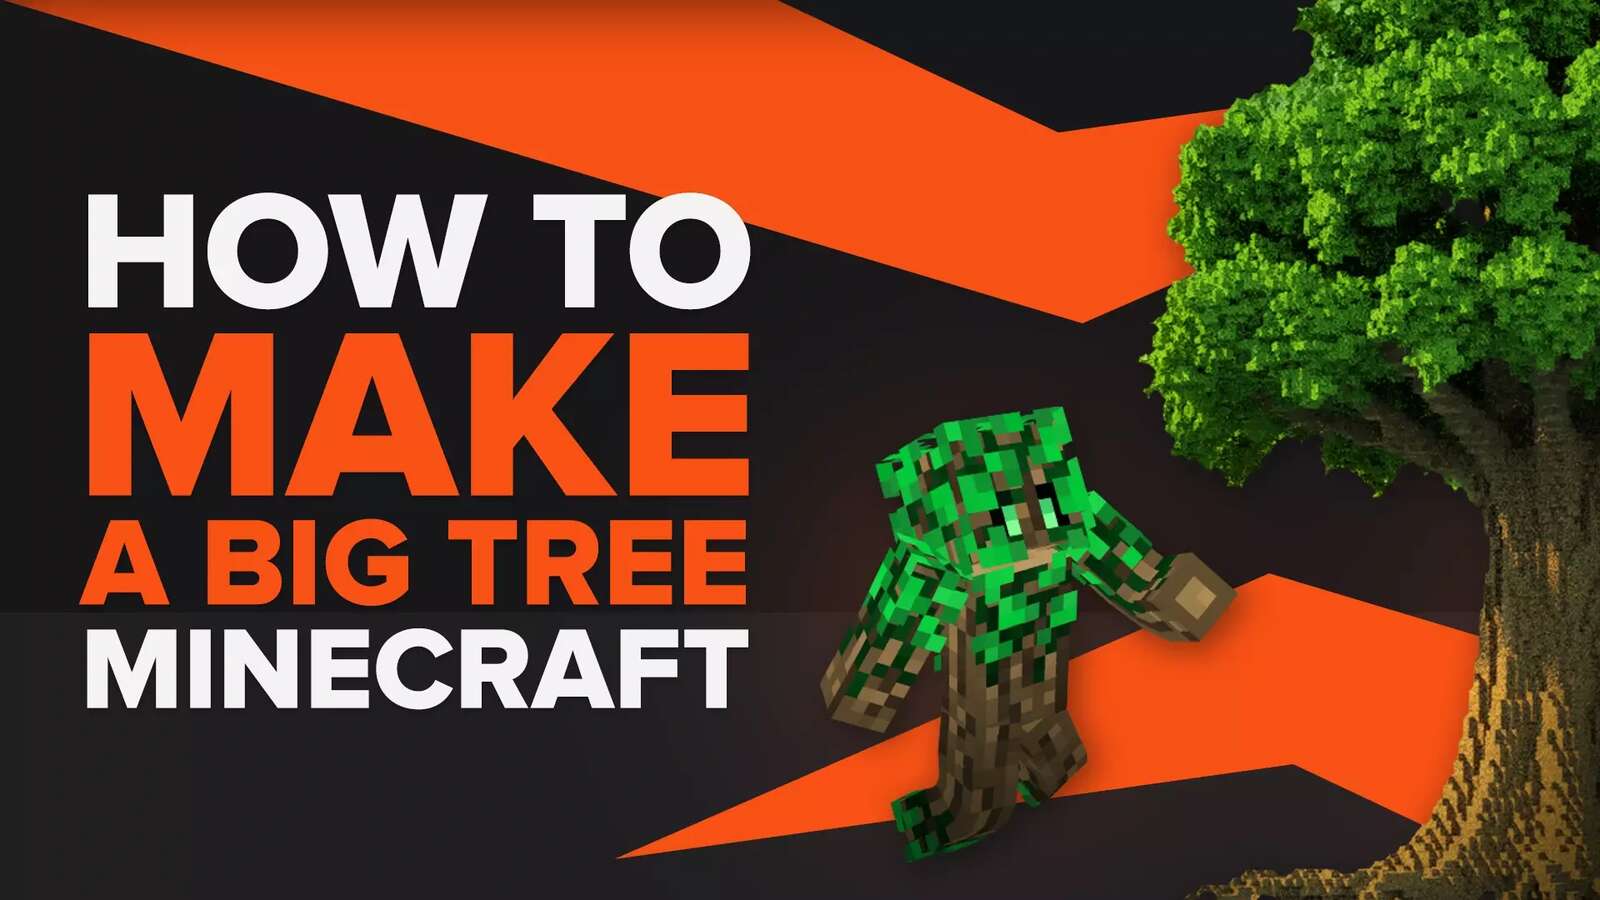 How to Grow a Big Tree in Minecraft [Step-by-Step]